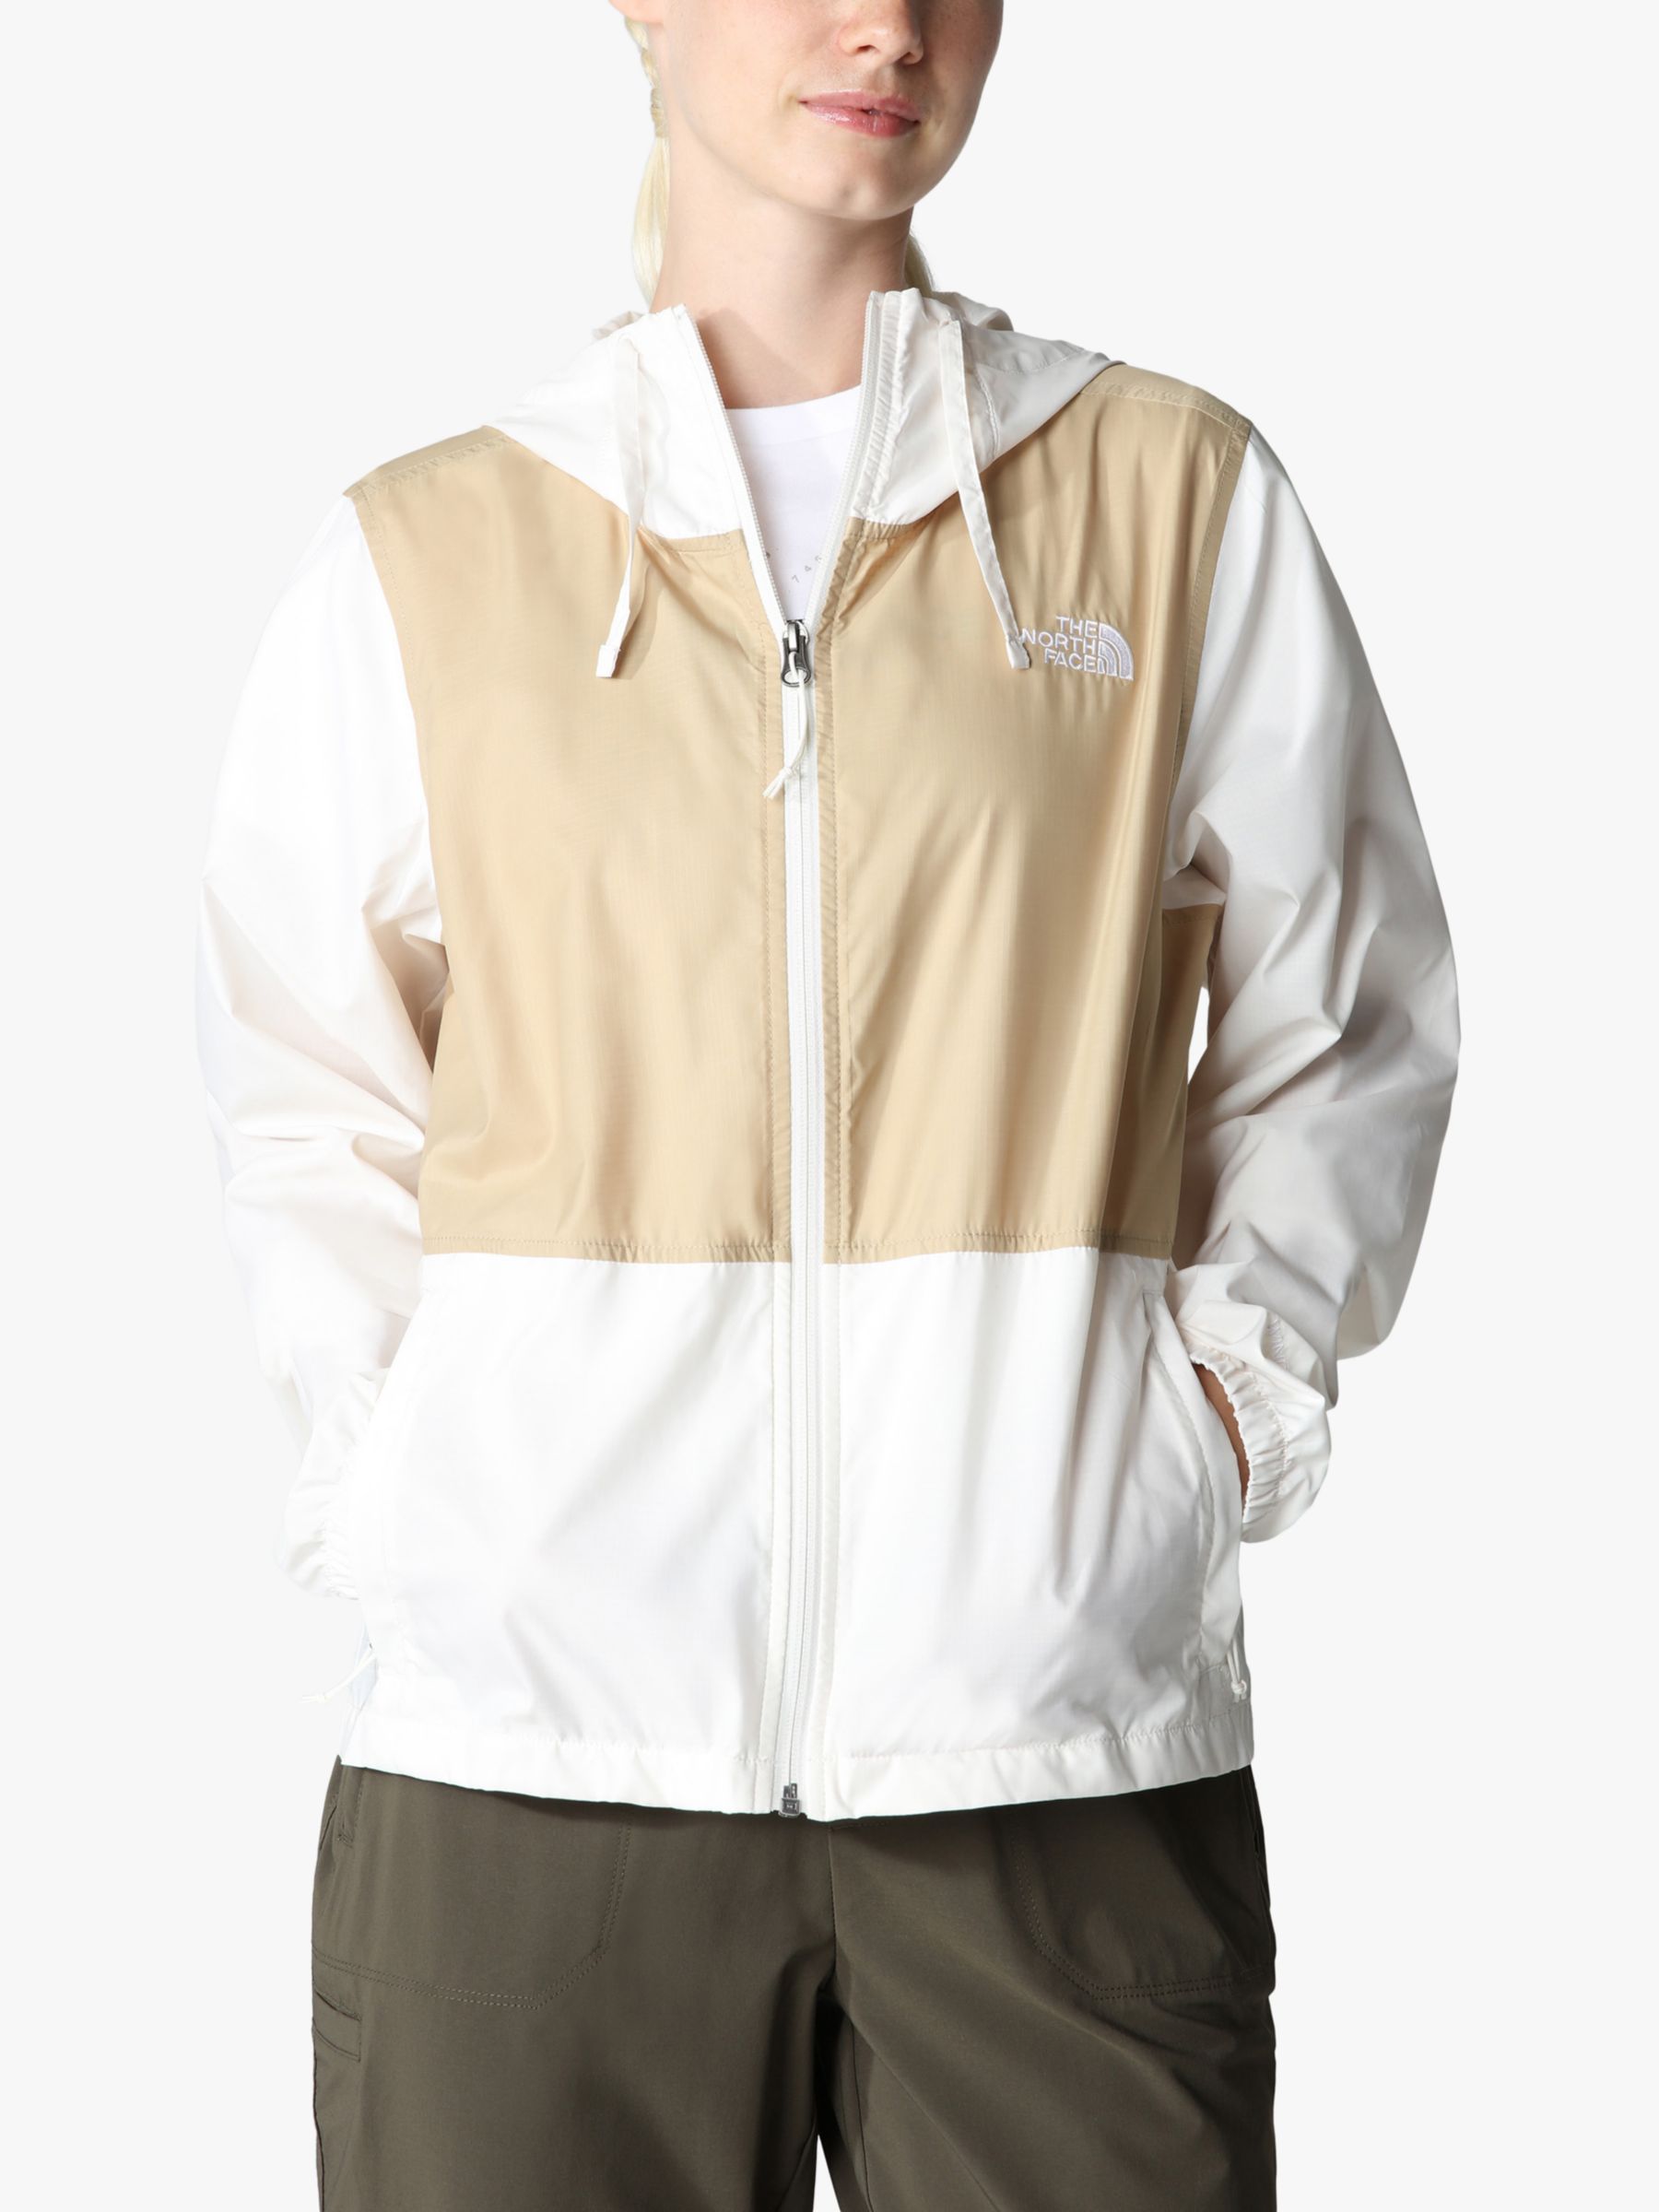 The North Face Women's Cyclone III Jacket, White/Stone, XL